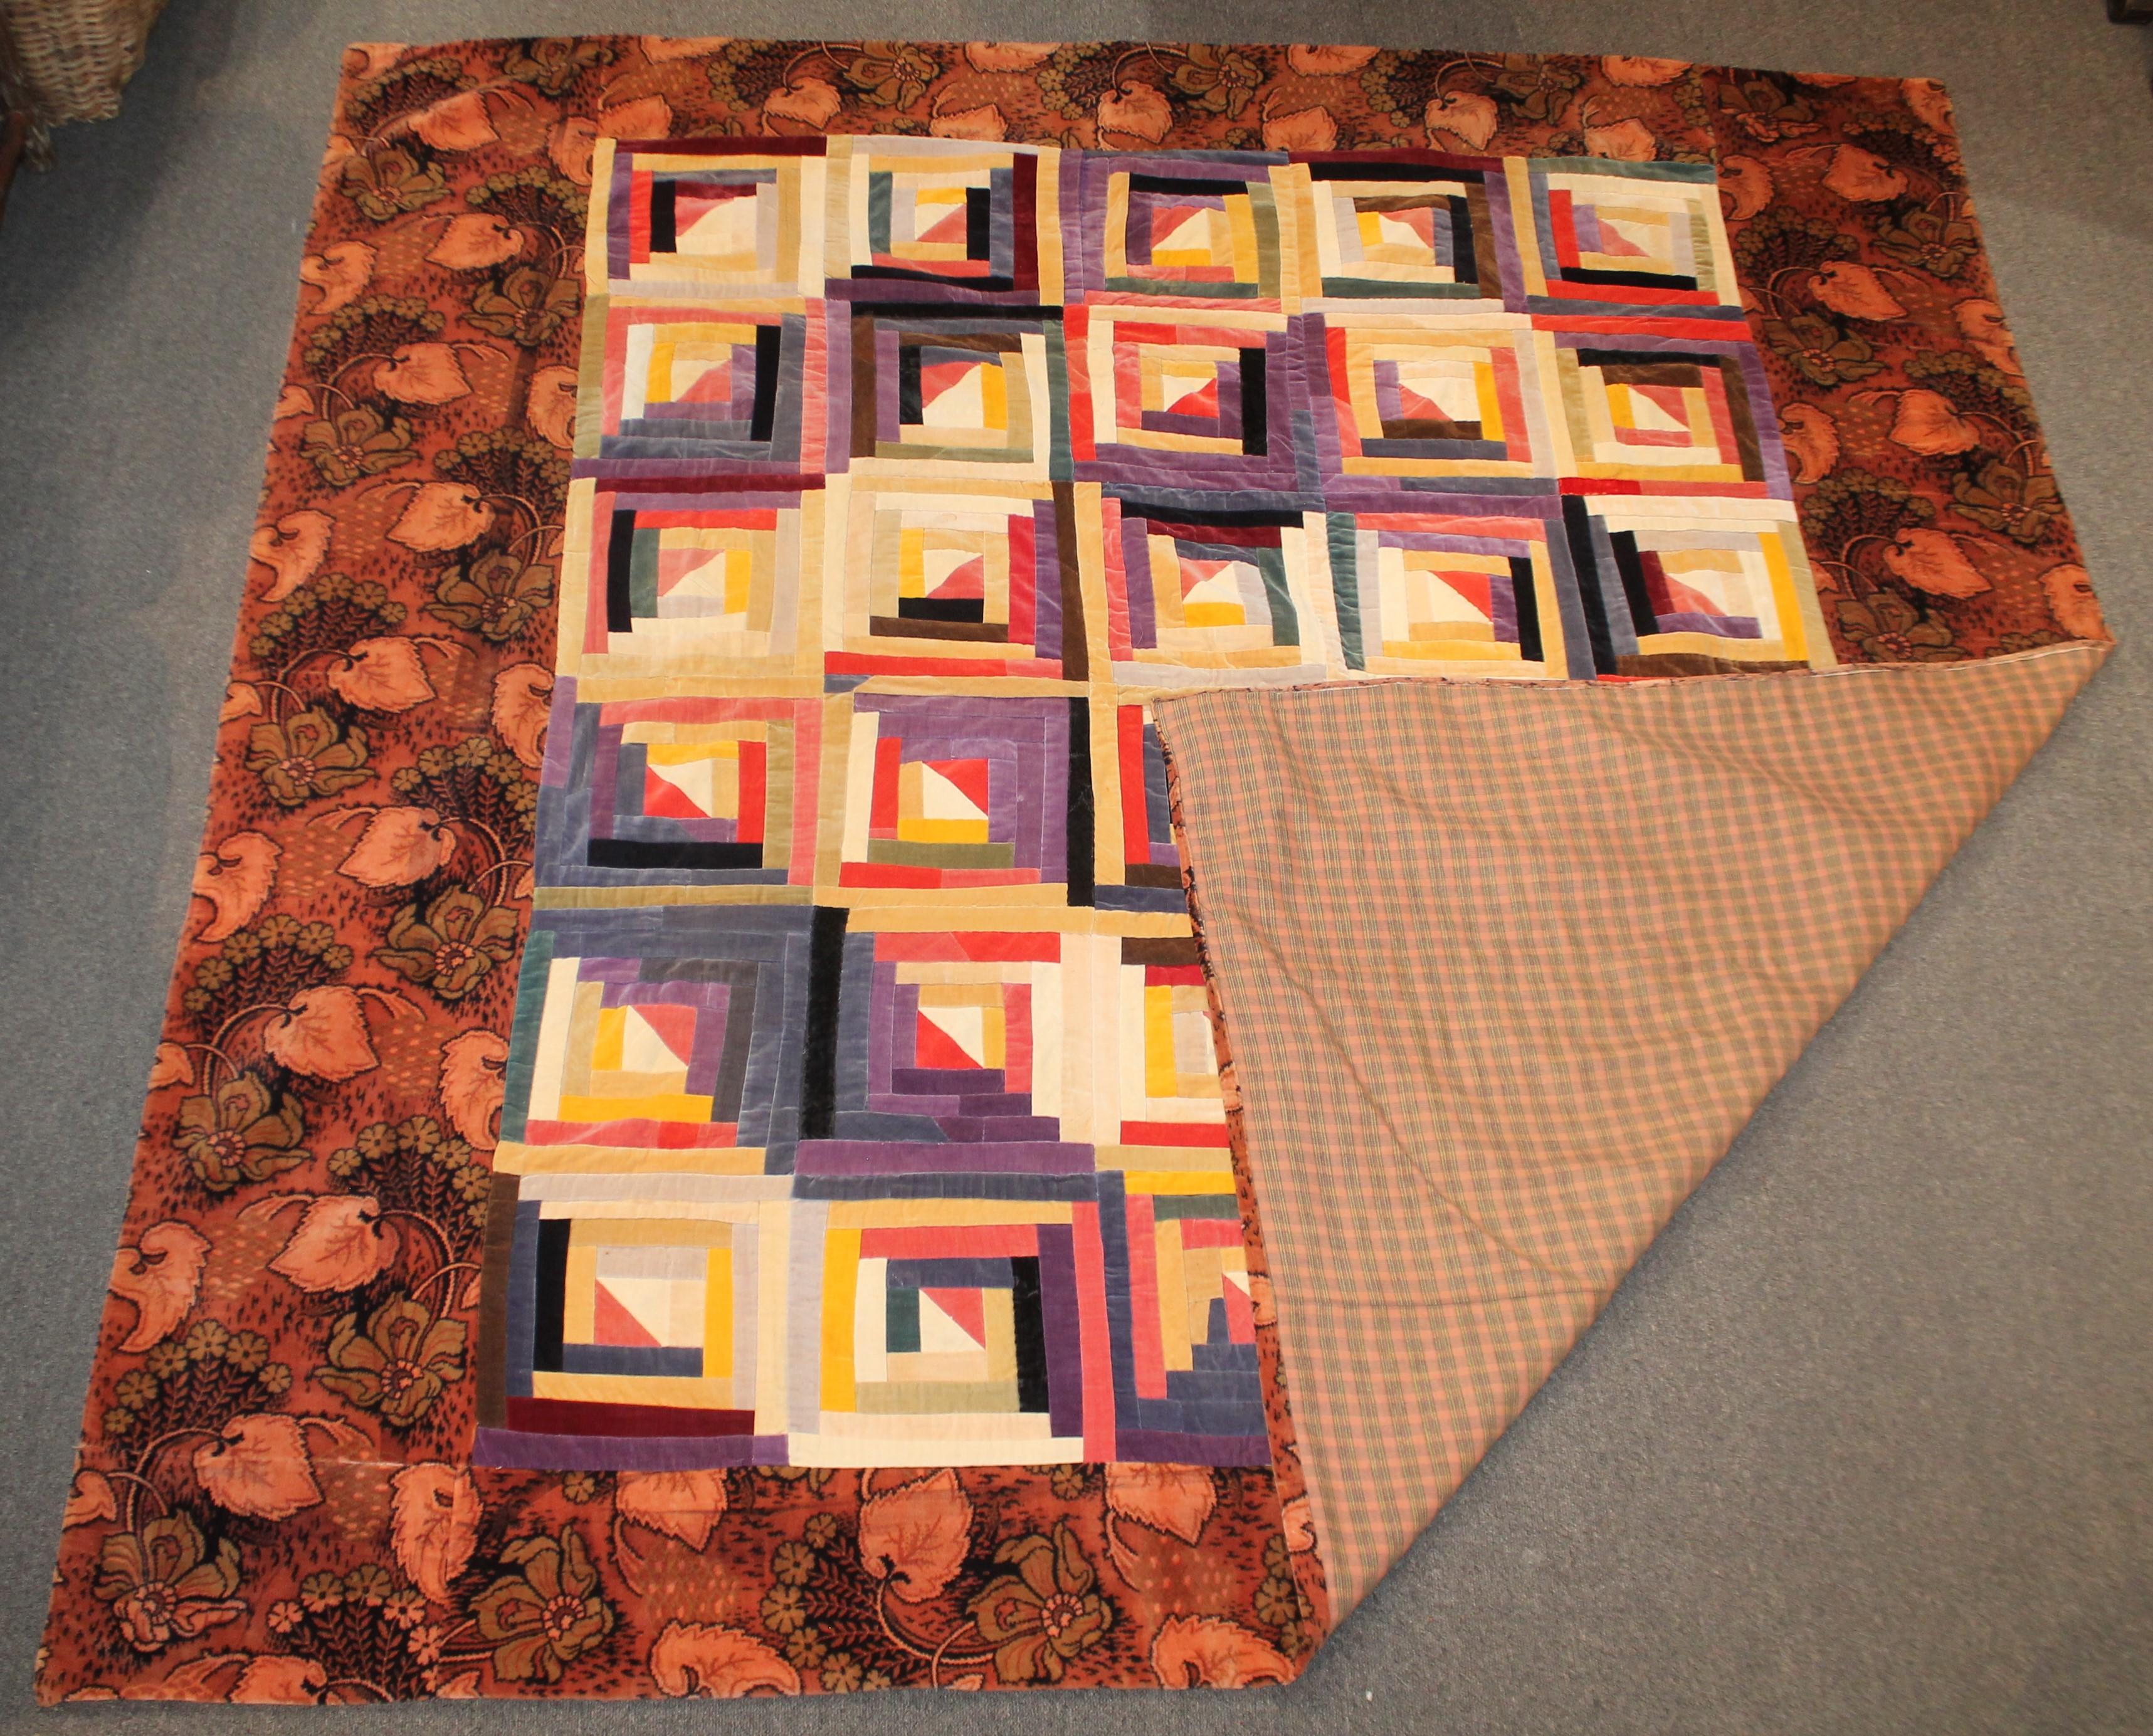 This fine and lux velvet antique quilt in a log cabin pattern with a printed velvet border is in fine condition. The backing is in a cotton plaid fabric. The condition is very good.